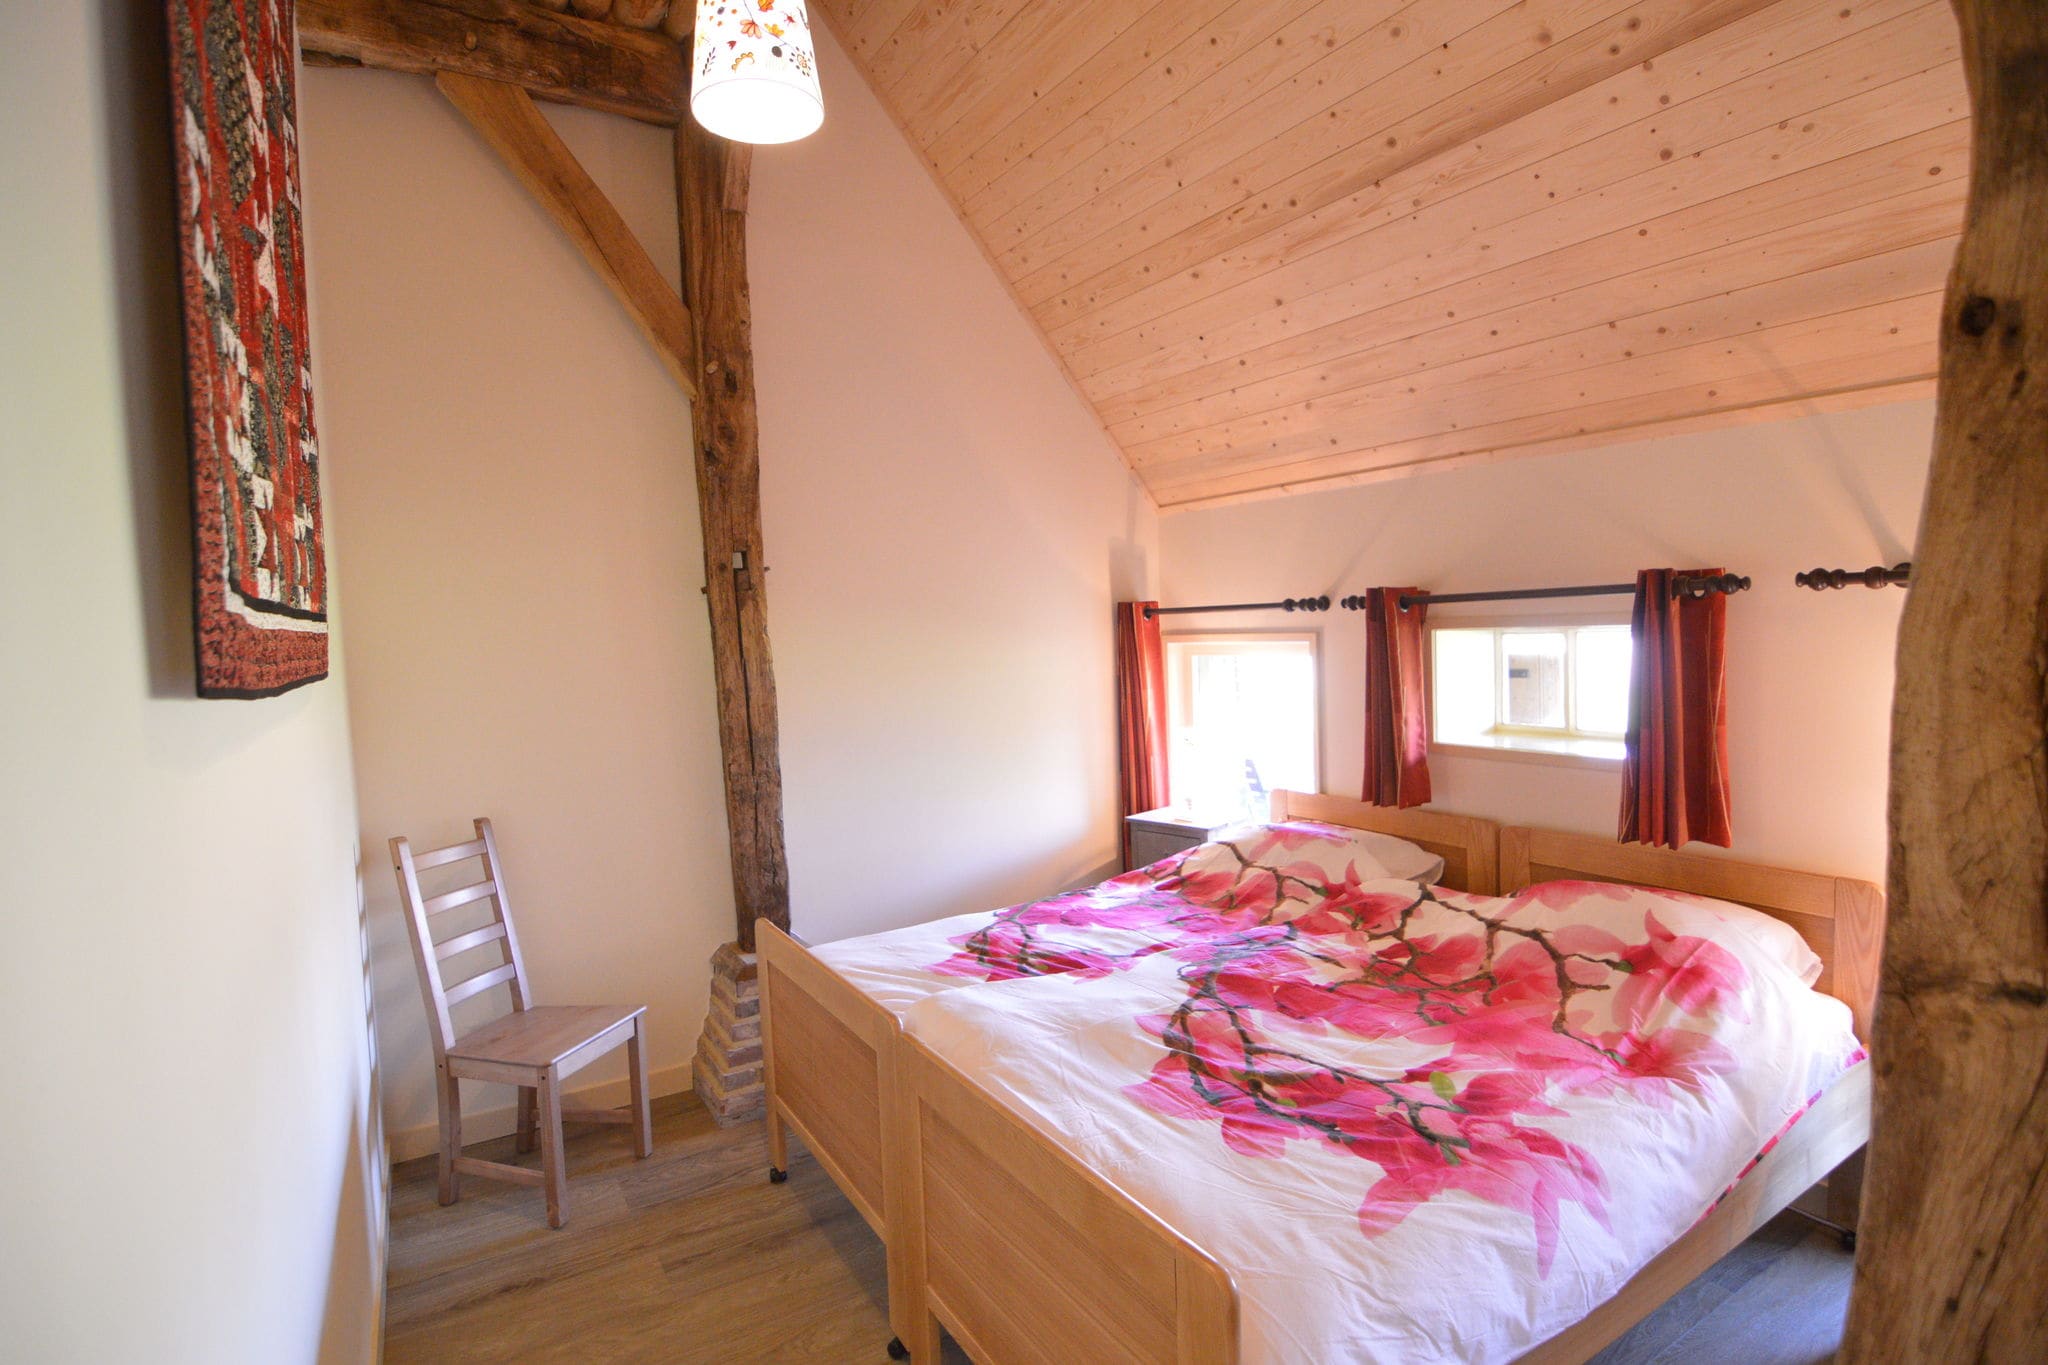 Staying in a thatched barn with box bed Achterhoek